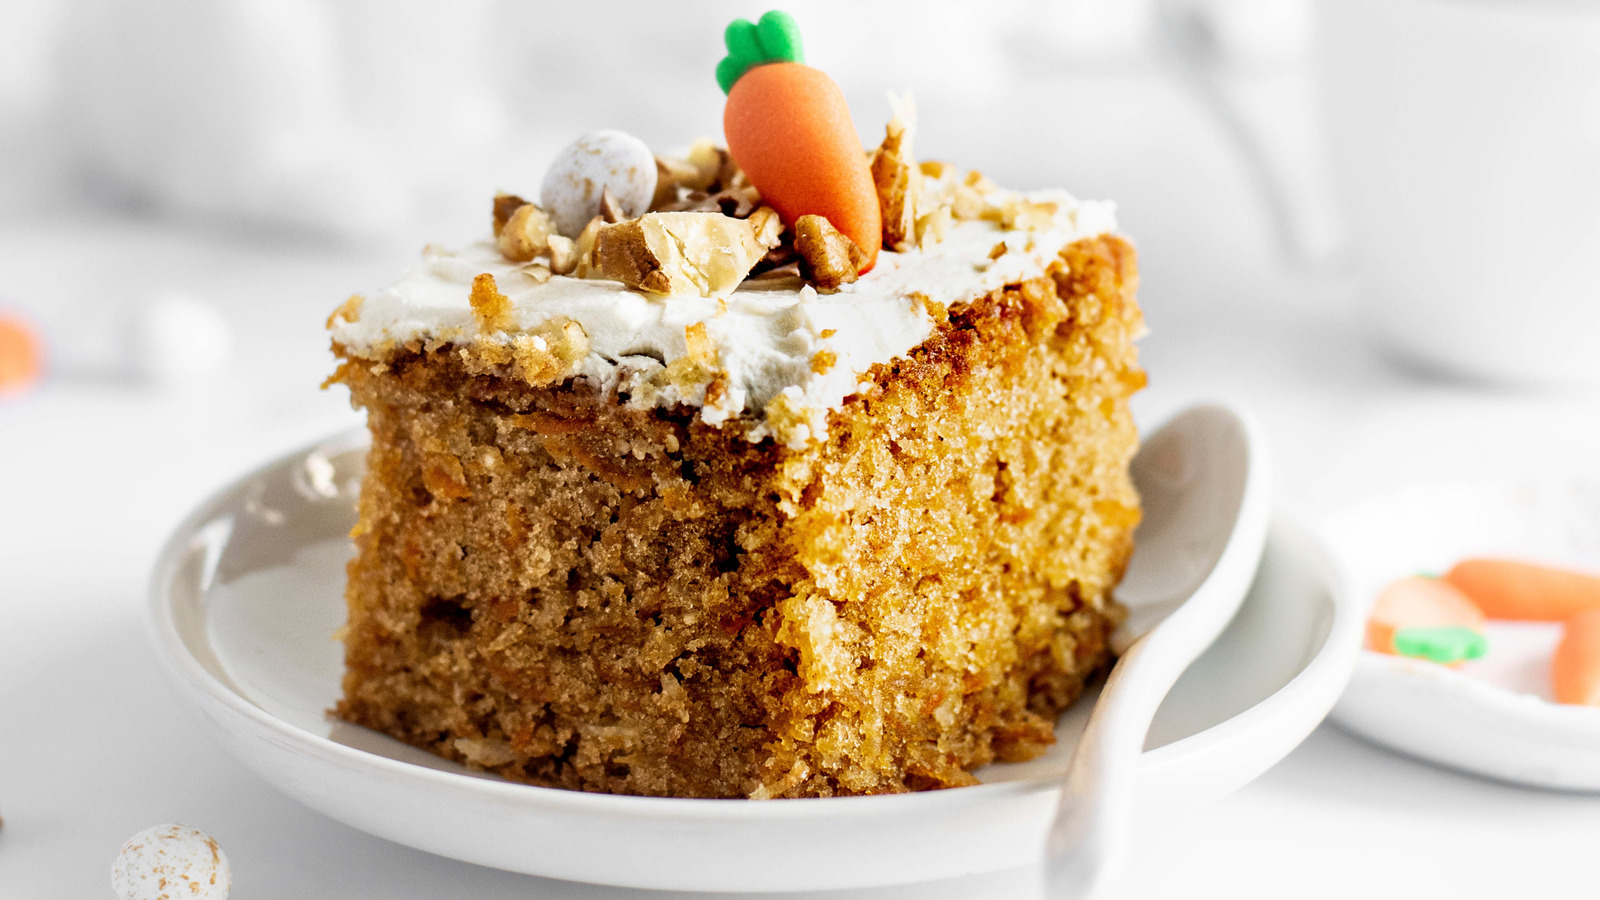 https://www.tastingtable.com/img/gallery/how-you-should-be-grating-carrots-for-carrot-cake/l-intro-1693602200.jpg